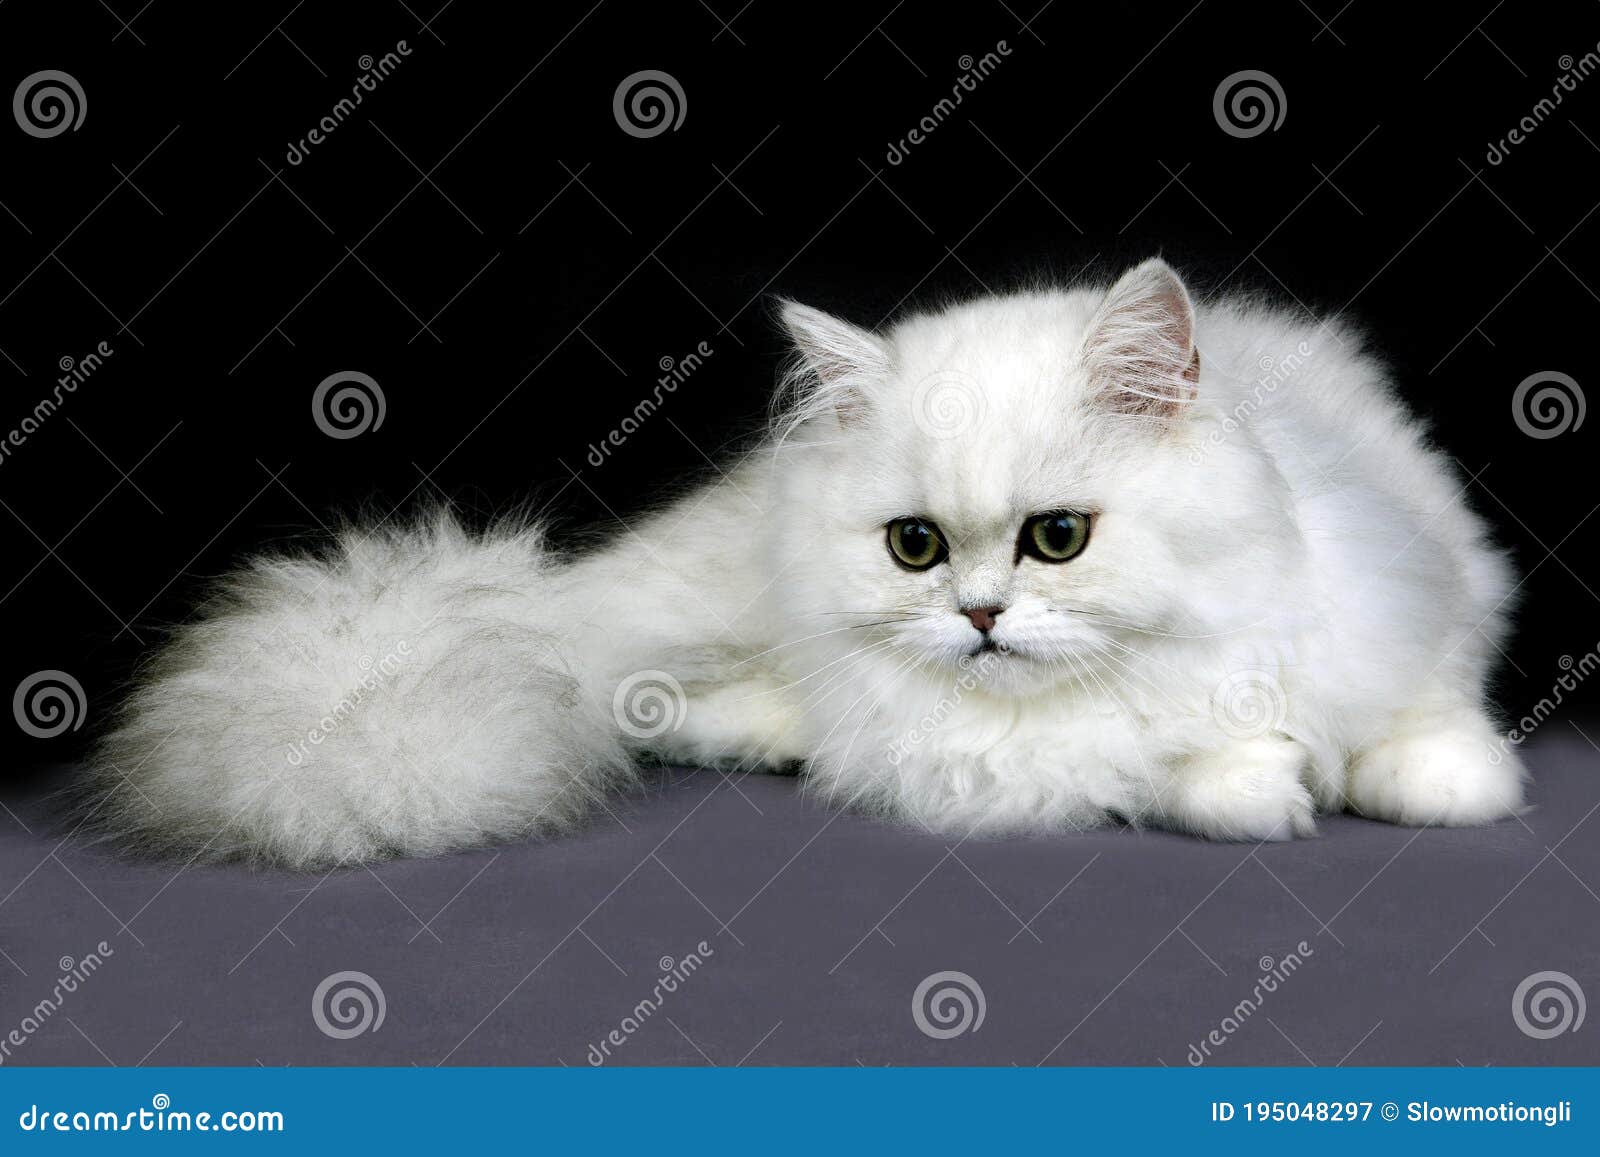 Chinchilla Persian Domestic Cat, Adult Against Black Background Stock - Image of adult, length: 195048297